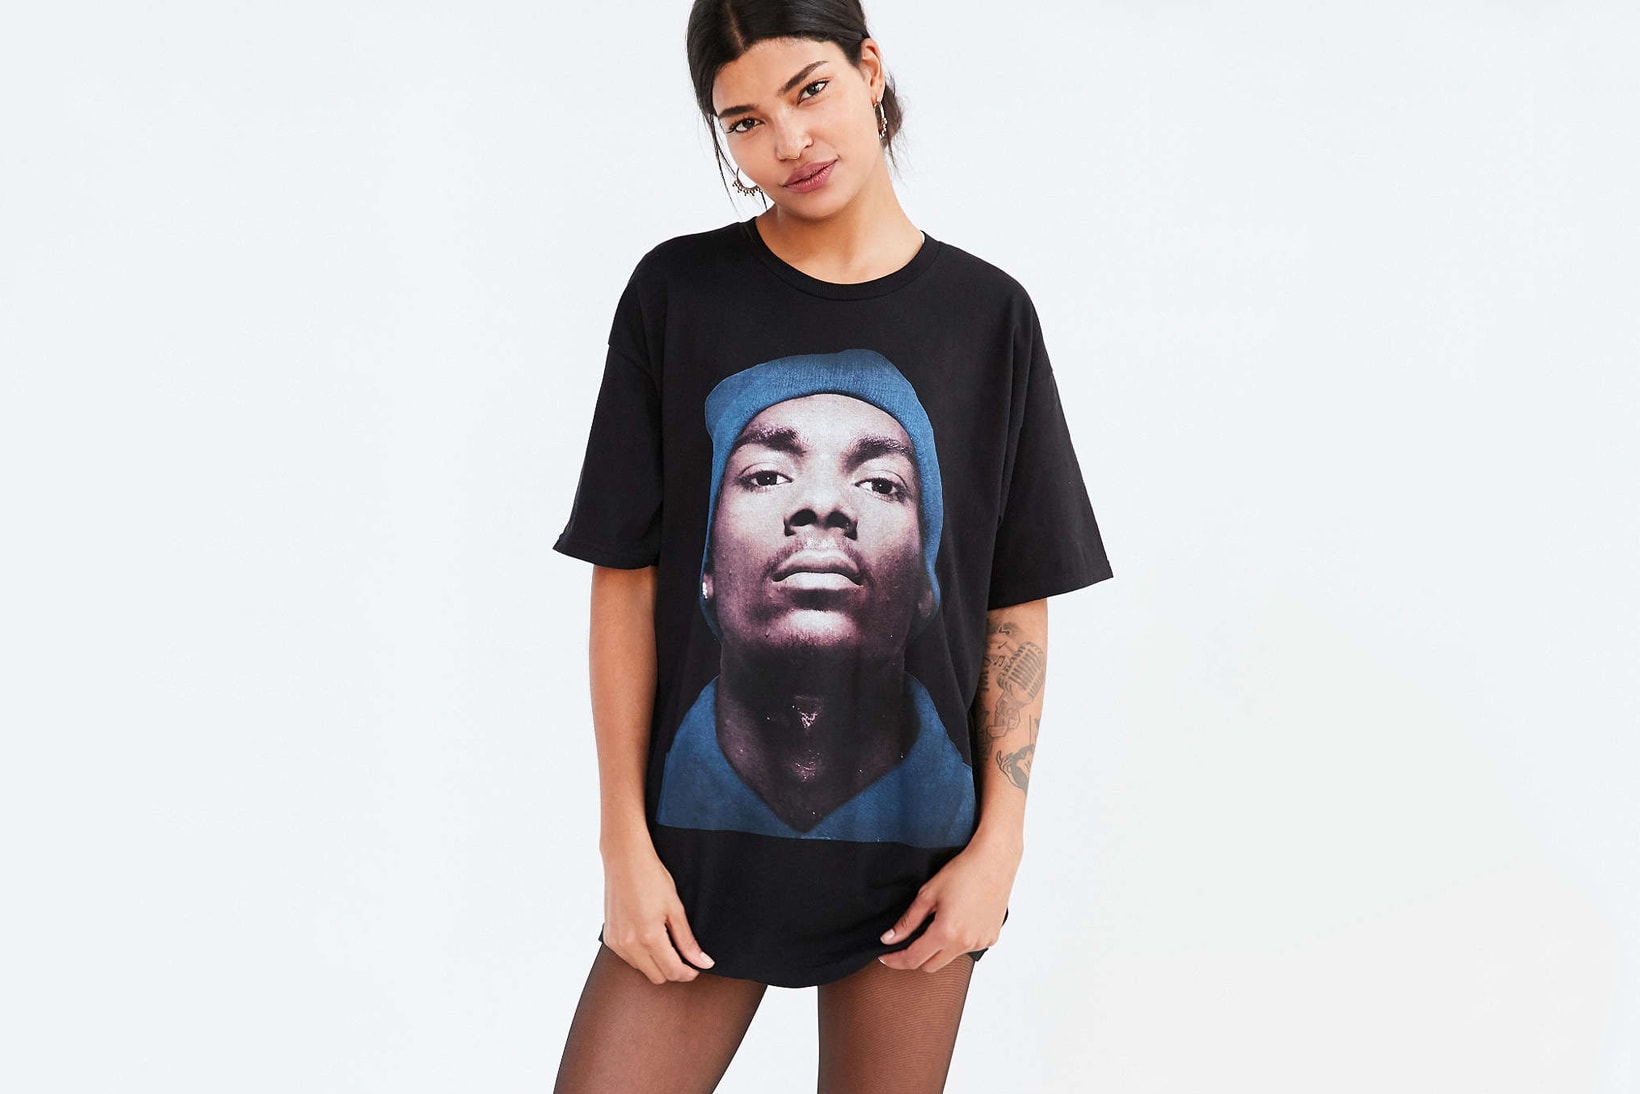 Urban Outfitters Version of Vetements' Snoop Dogg T-Shirt Is $24 USD